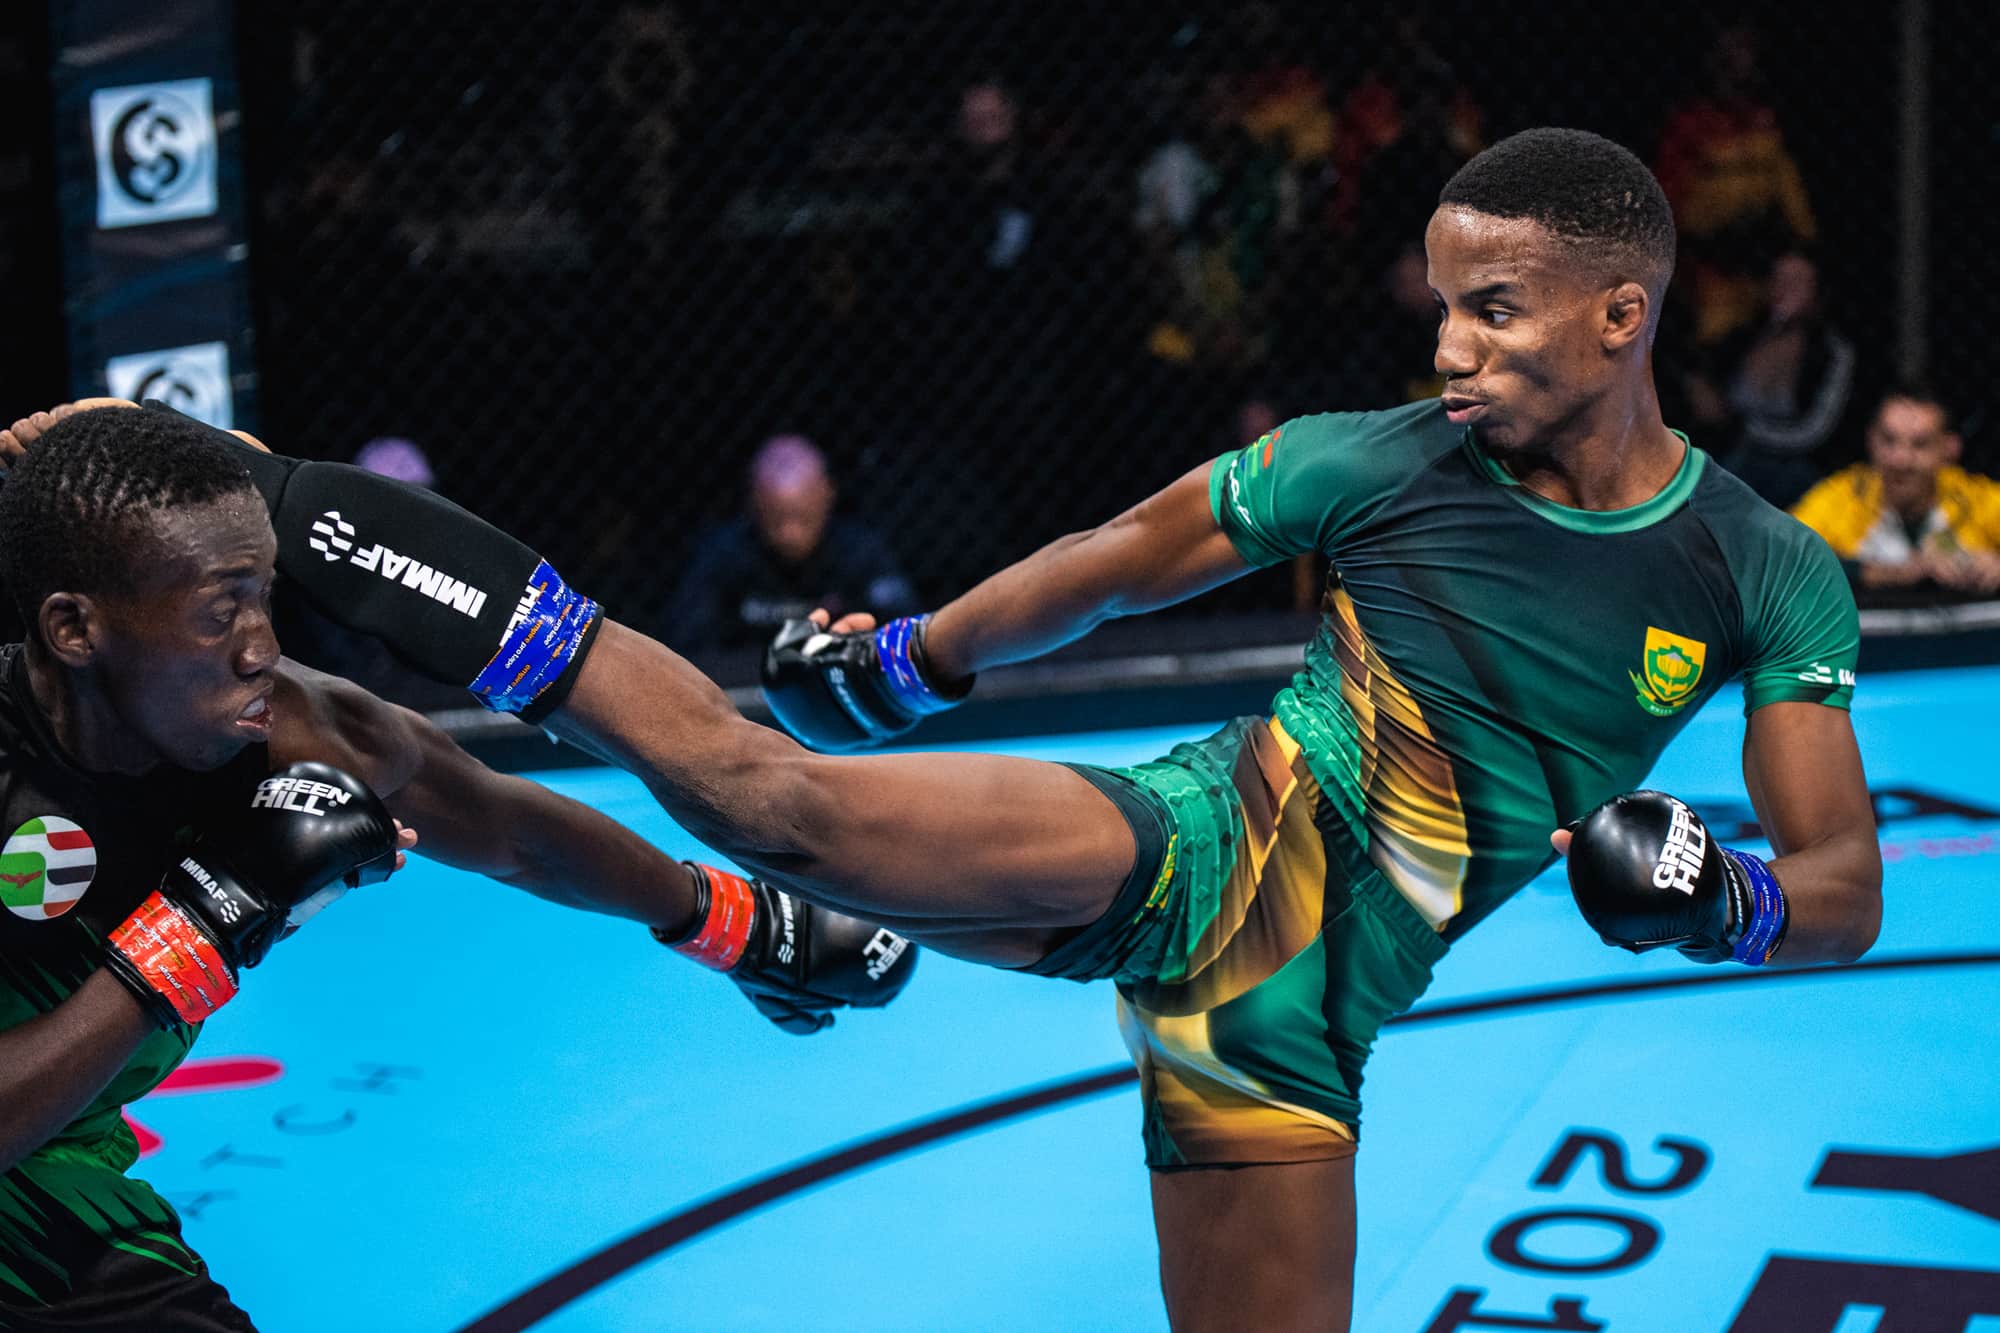 Nathanial Komana Hoping to be Third Time Lucky in Search of IMMAF Gold